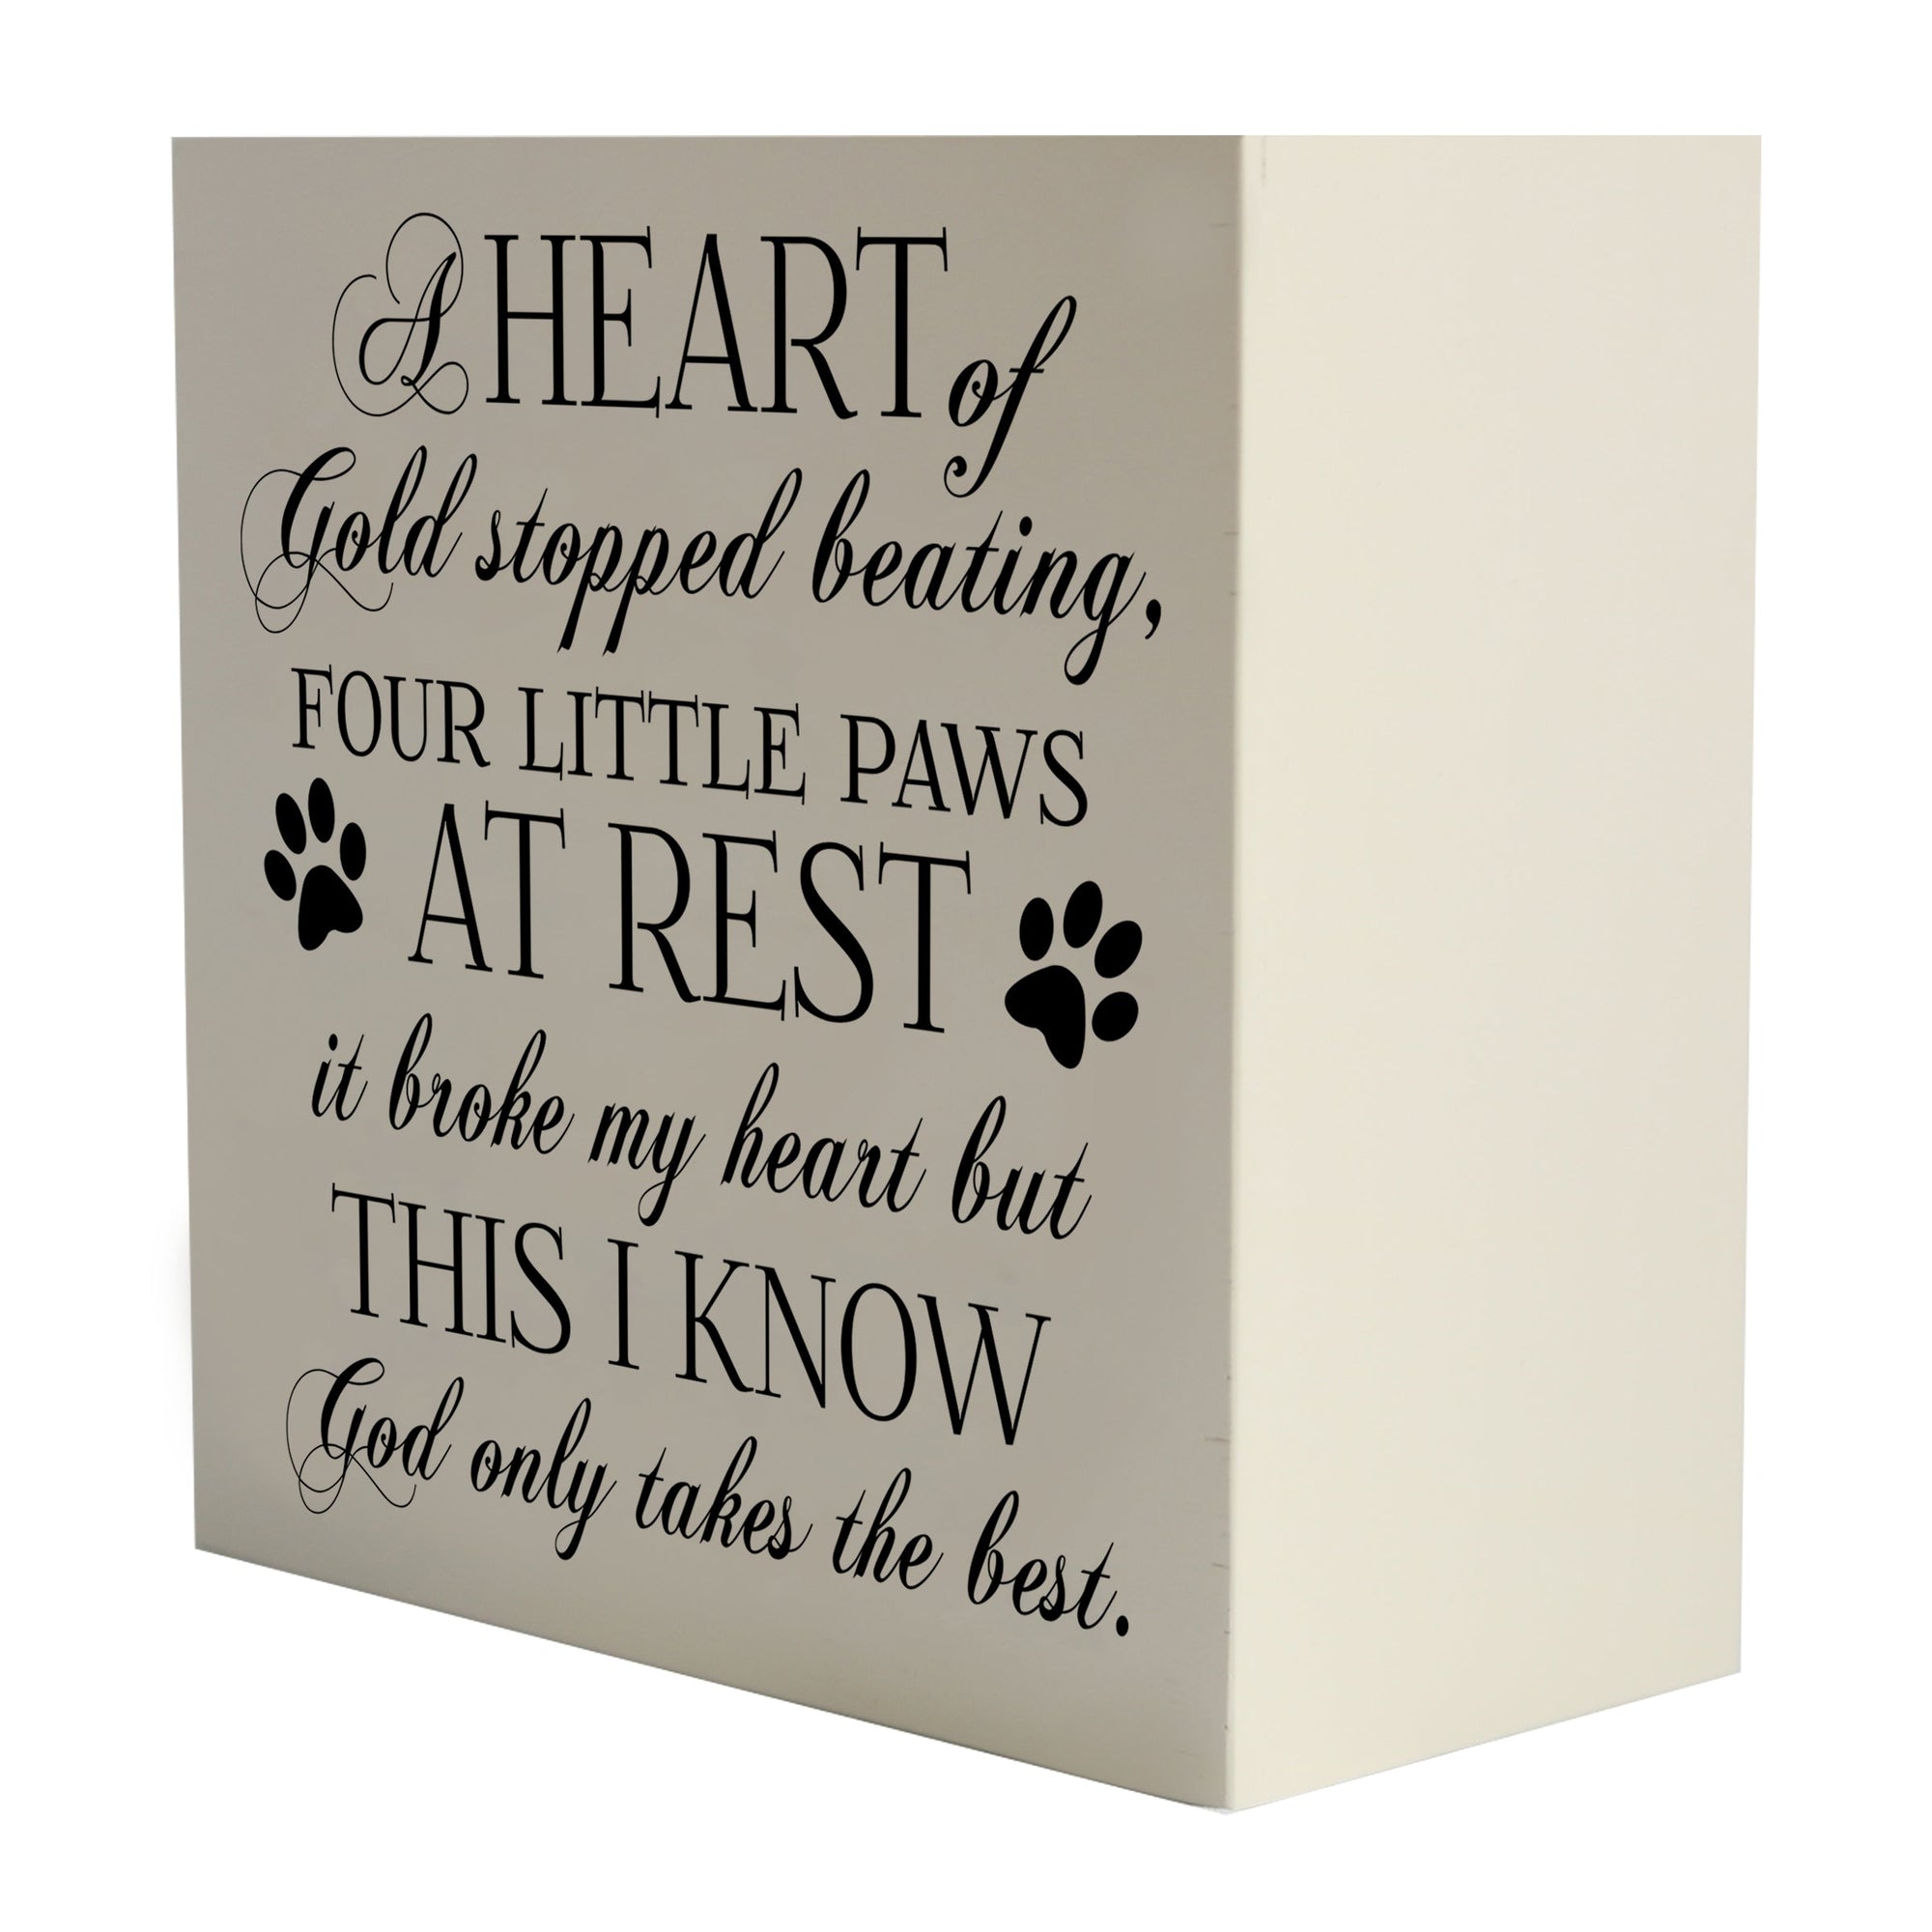 Pet Memorial Shadow Box Cremation Urn for Dog or Cat - A Heart of Gold